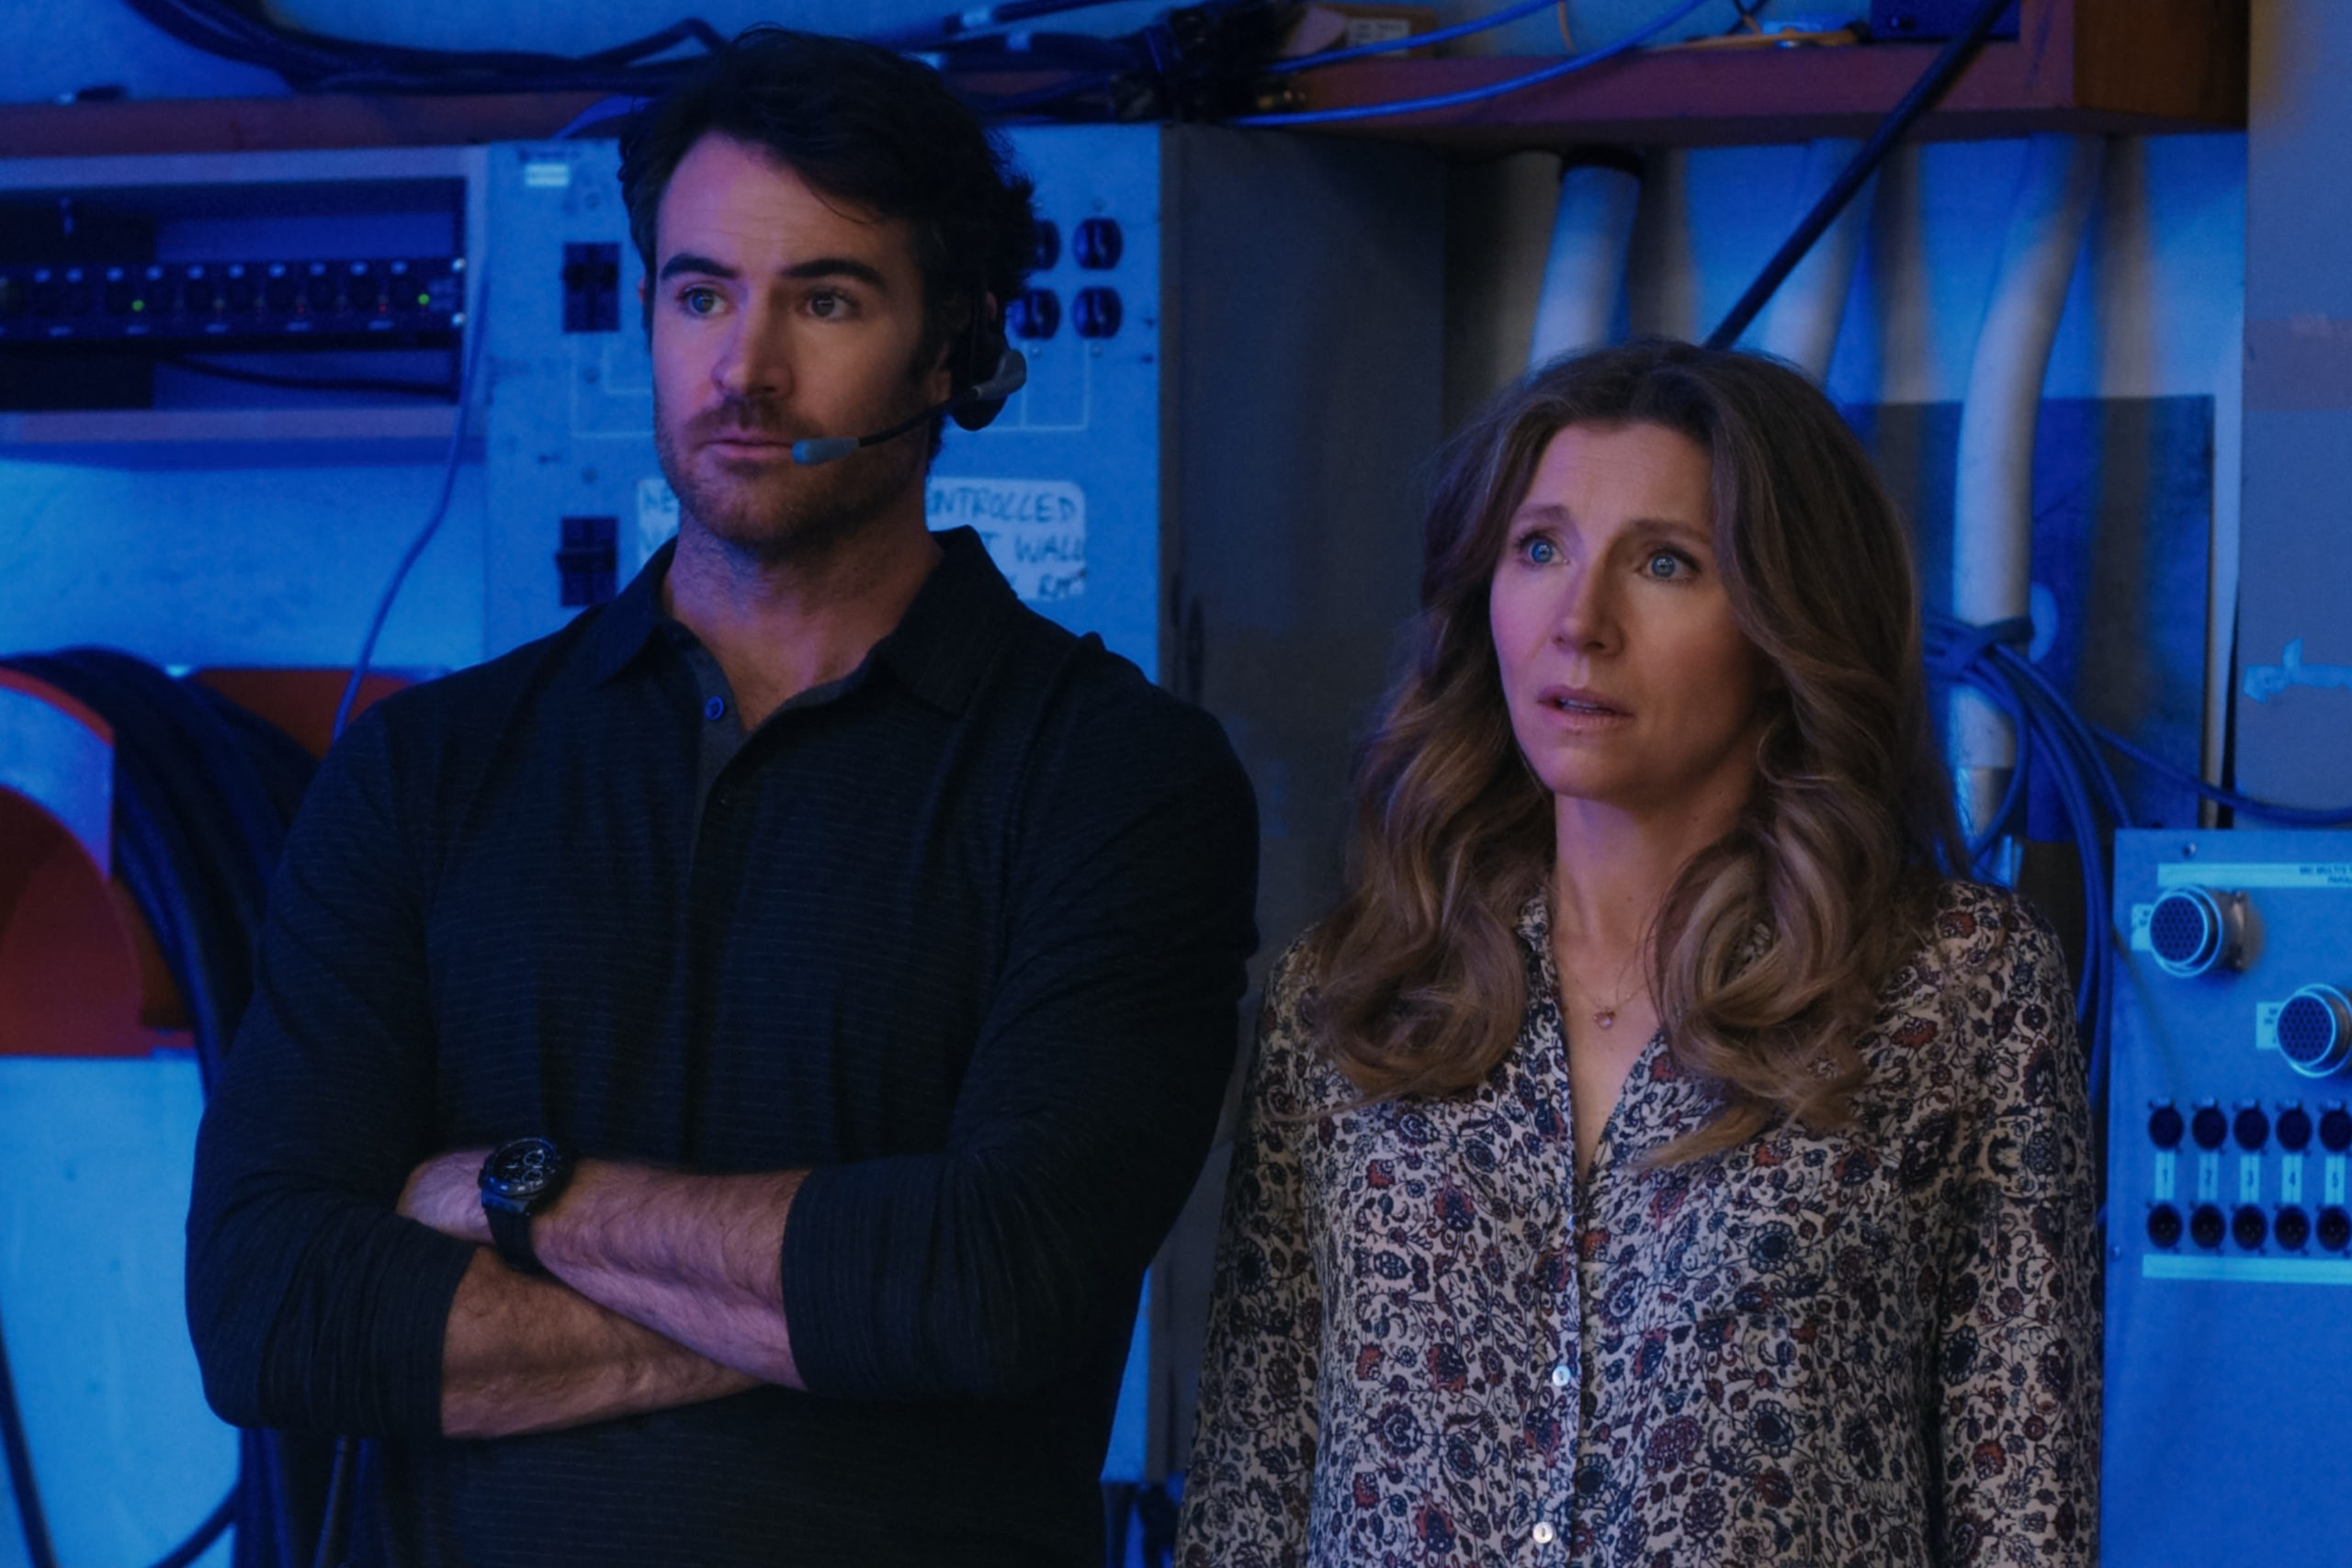 FIREFLY LANE (L to R) BEN LAWSON as RYAN and SARAH CHALKE as KATE in episode 109 of FIREFLY LANE. Cr. COURTESY OF NETFLIX © 2020